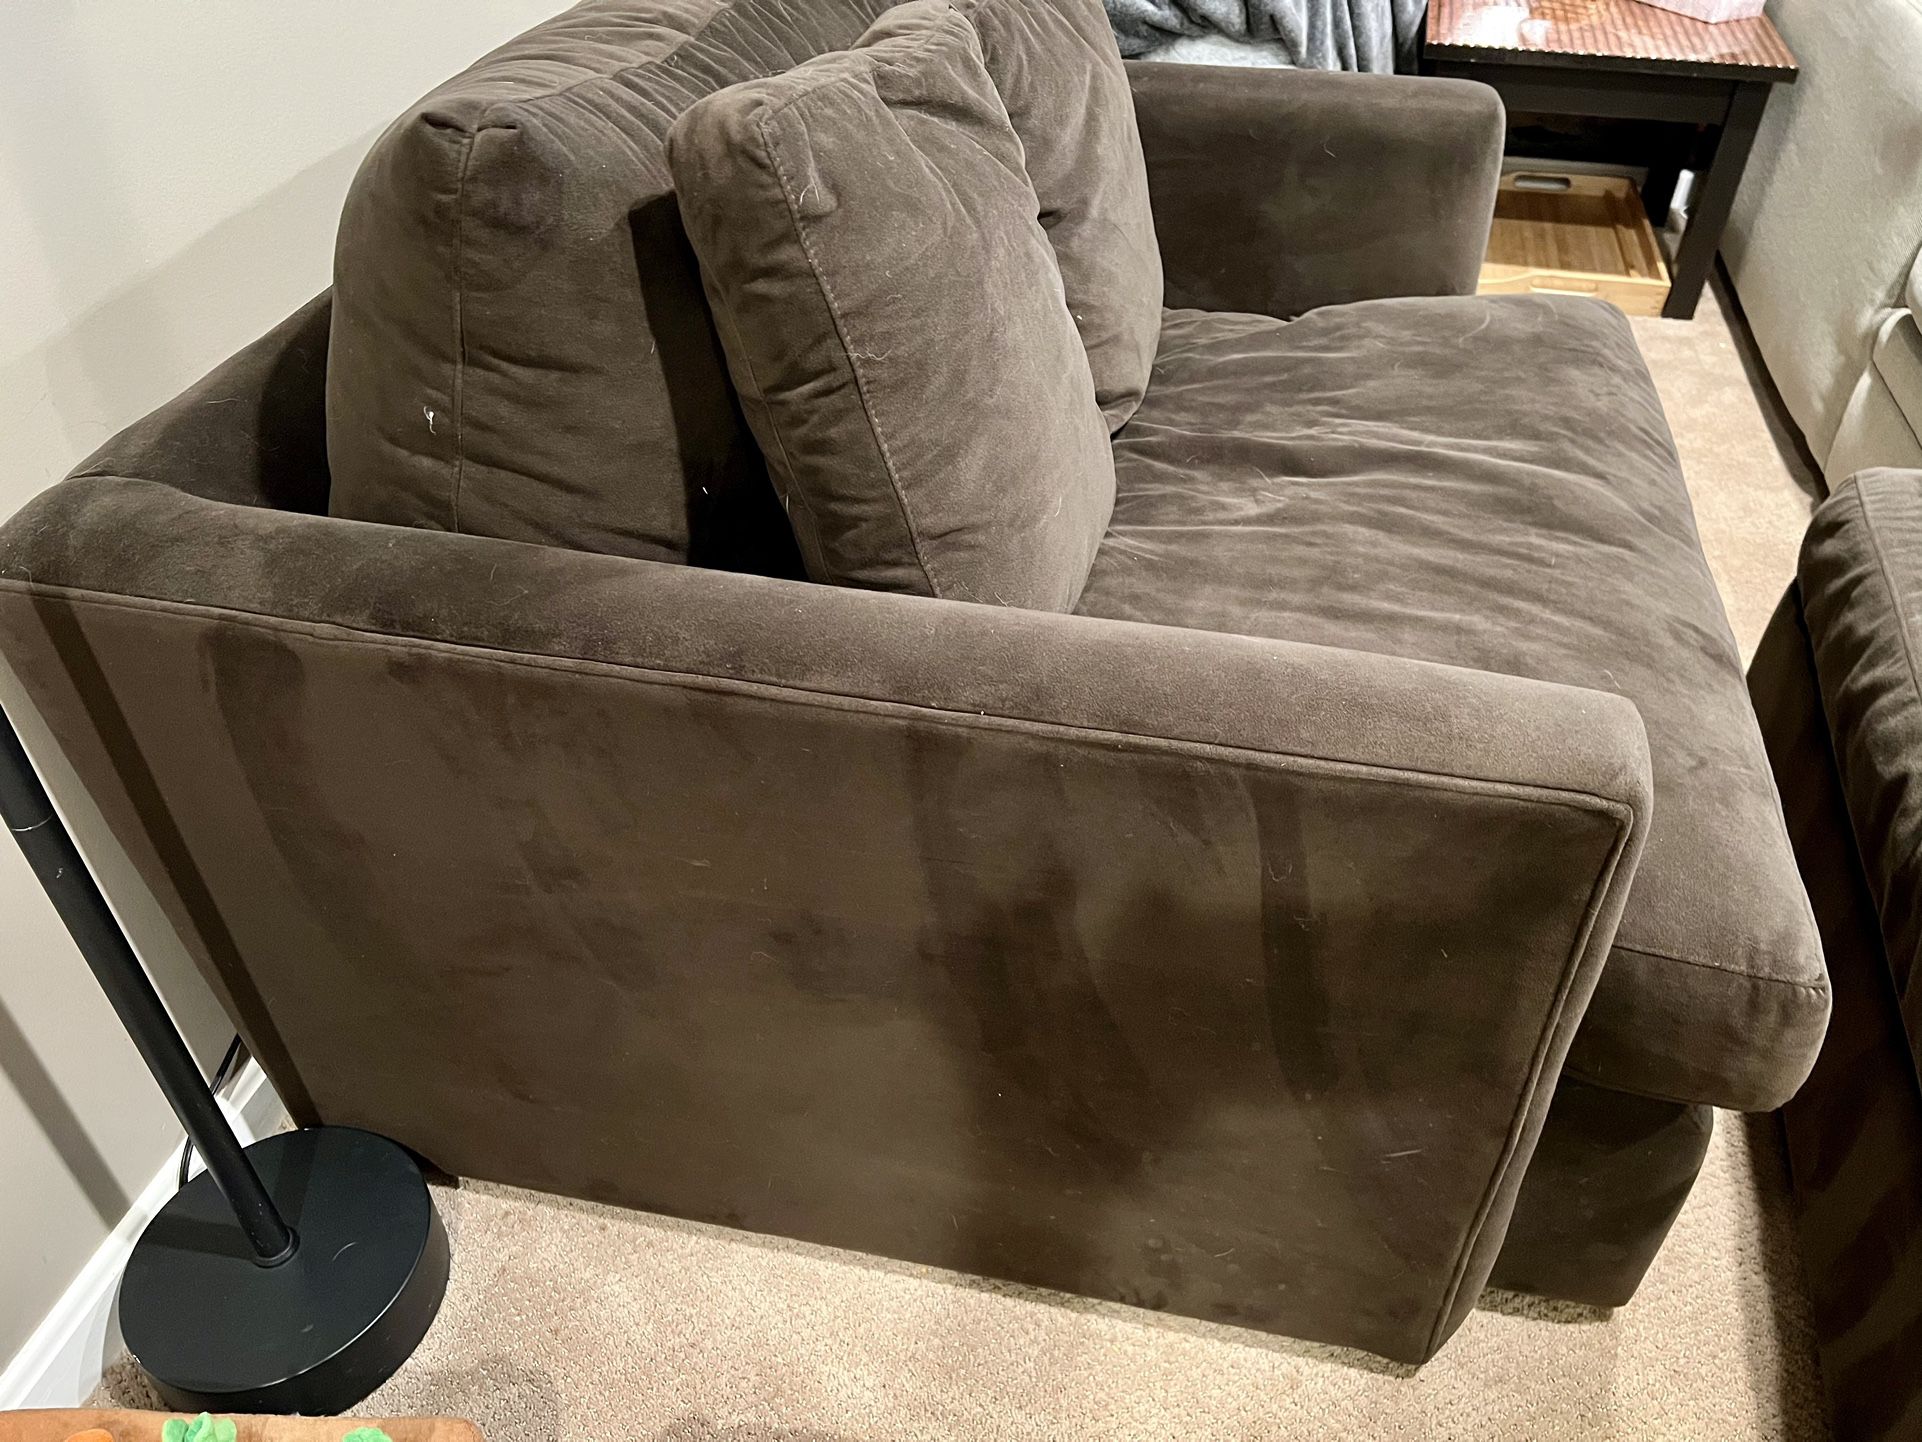 Crate & Barrel Chair And Ottoman